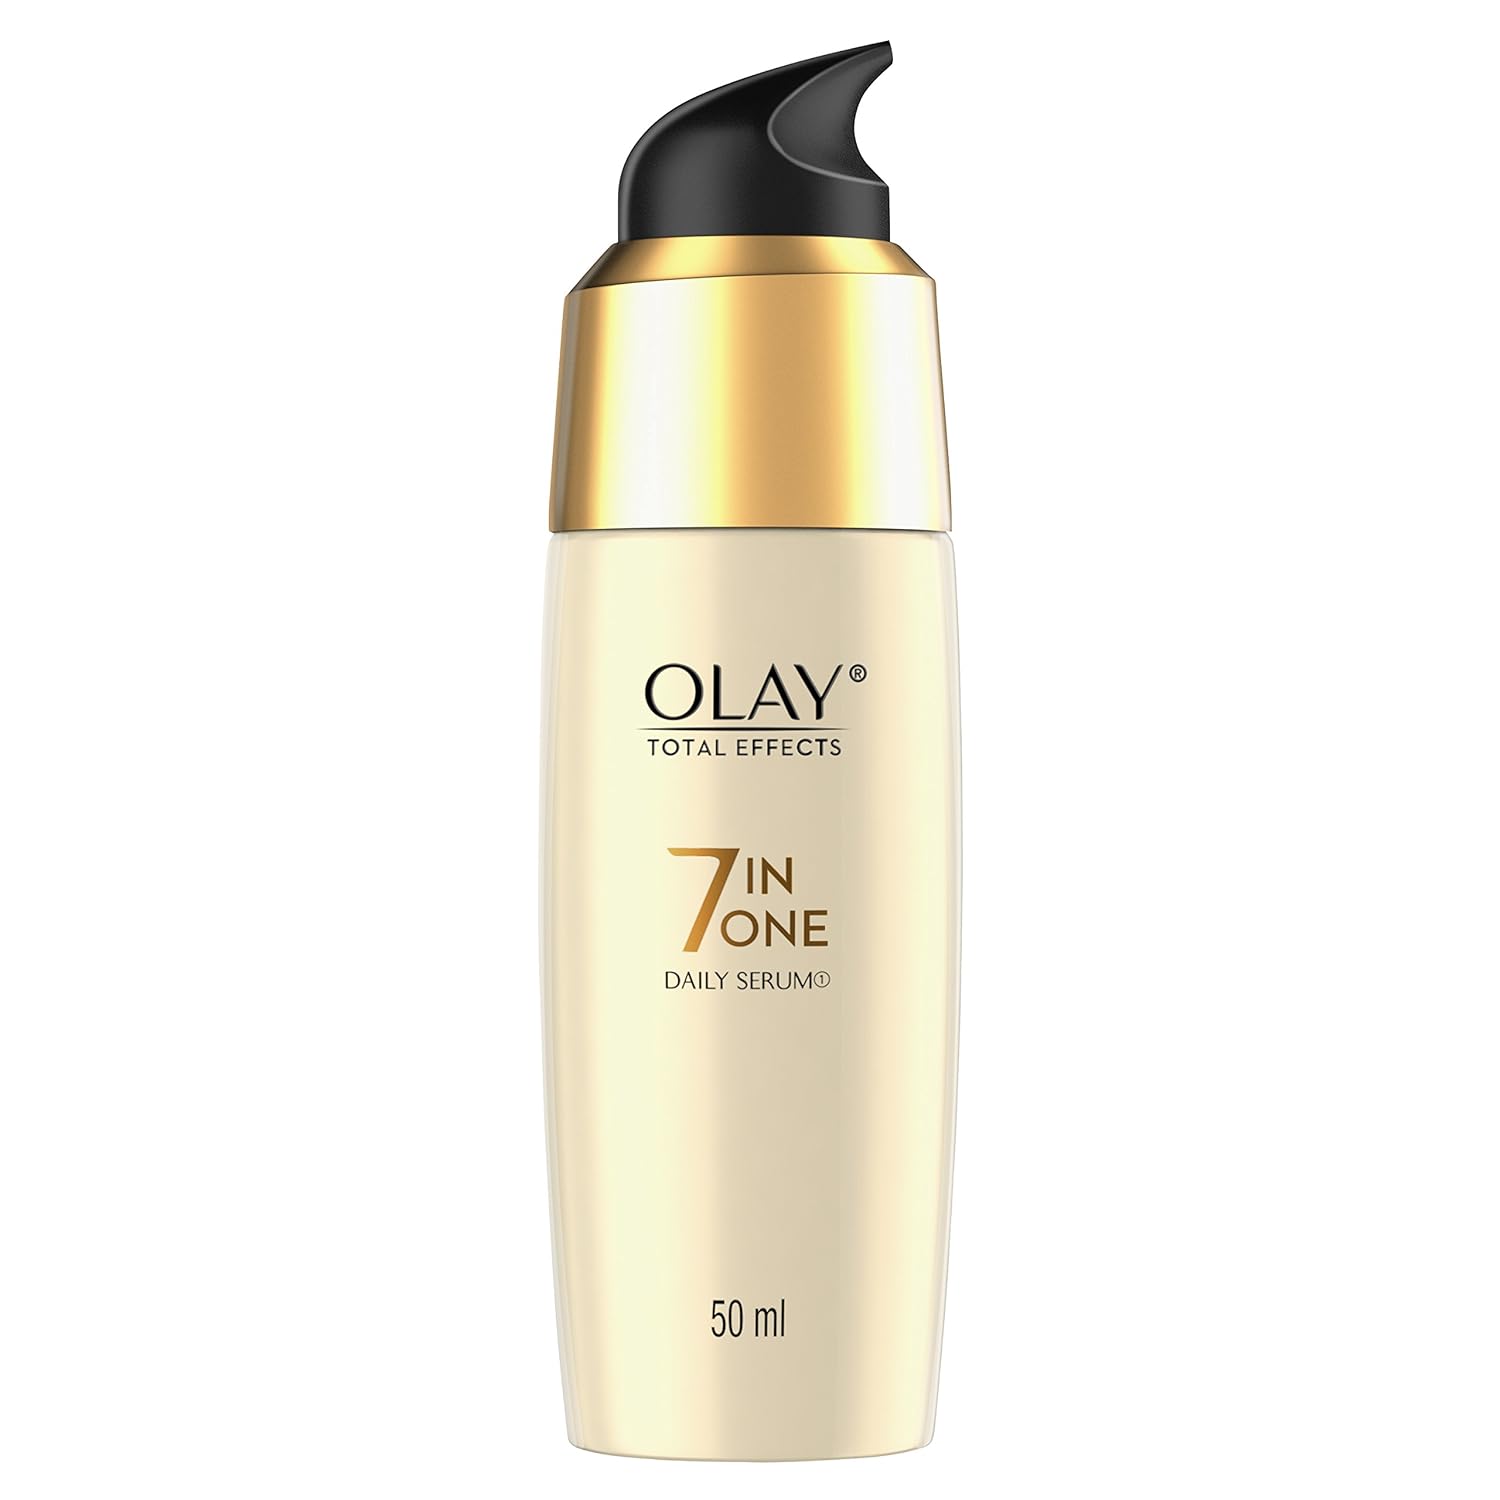 Olay Total Effects 7-in-1 Anti-Aging Serum, 50